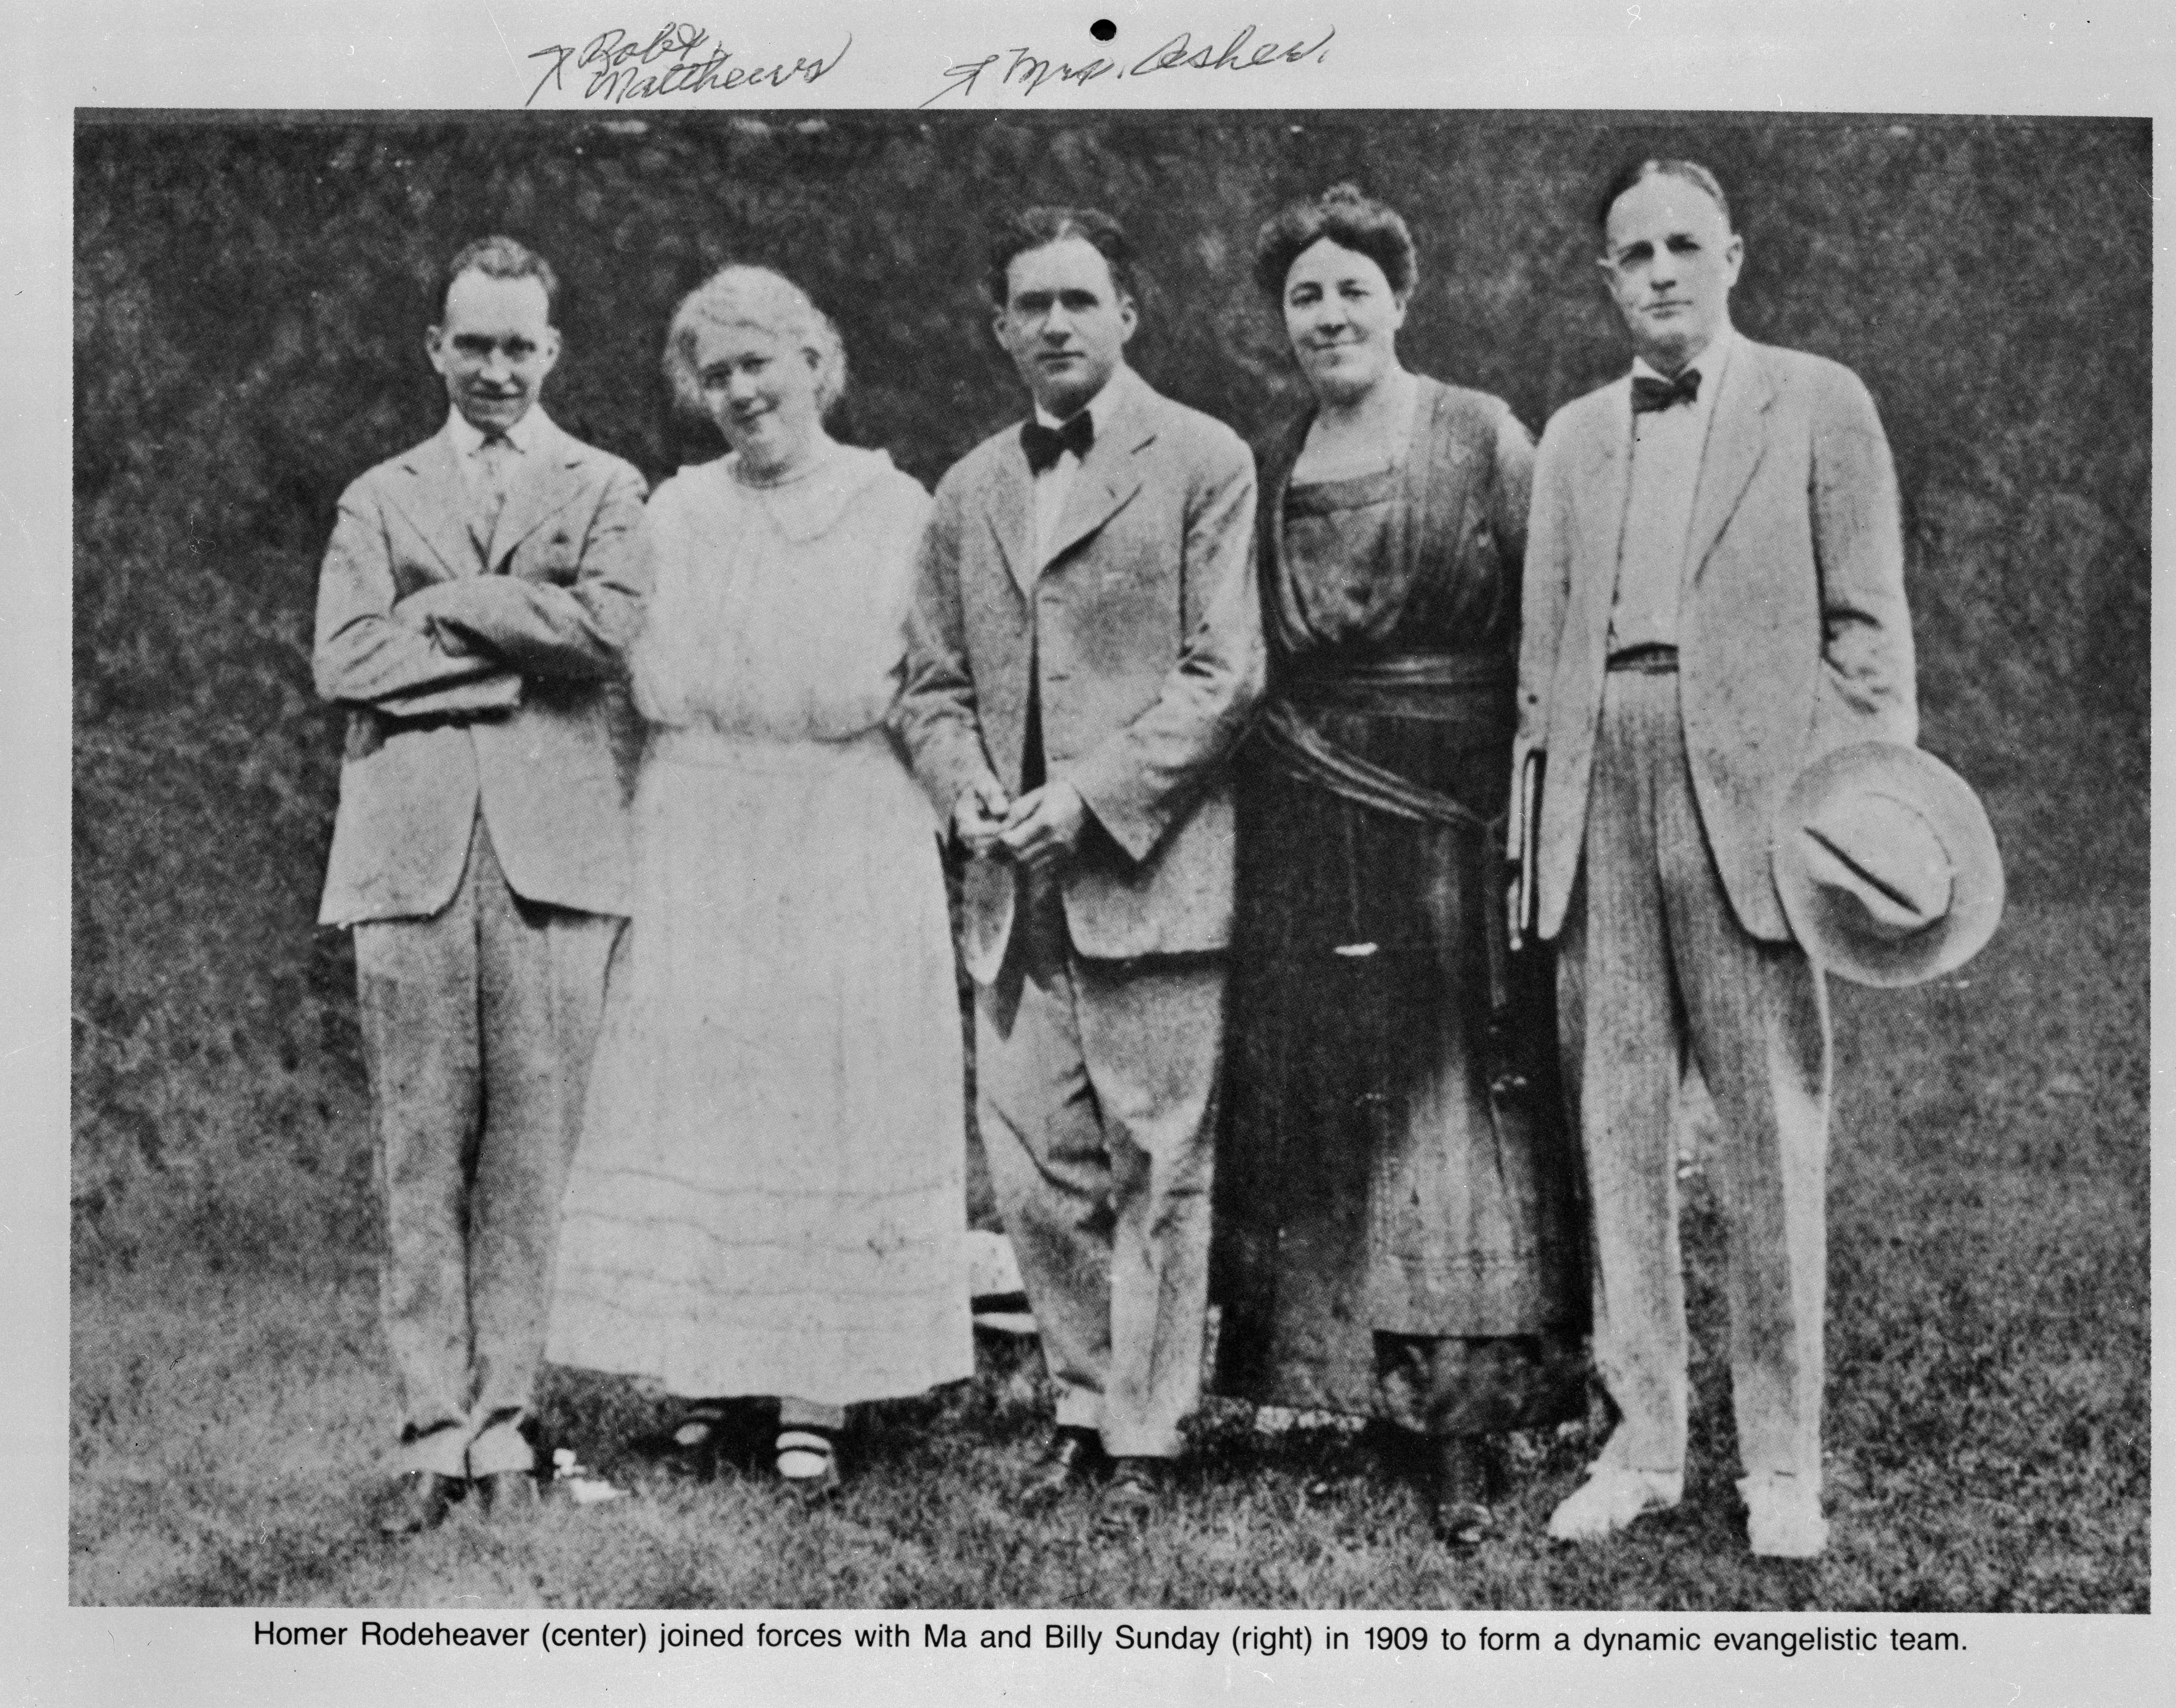 Homer Rodeheaver (center) with Ma and Billy Sunday (right), Robert Matthews (far left) and Mrs. Asher (second from left)